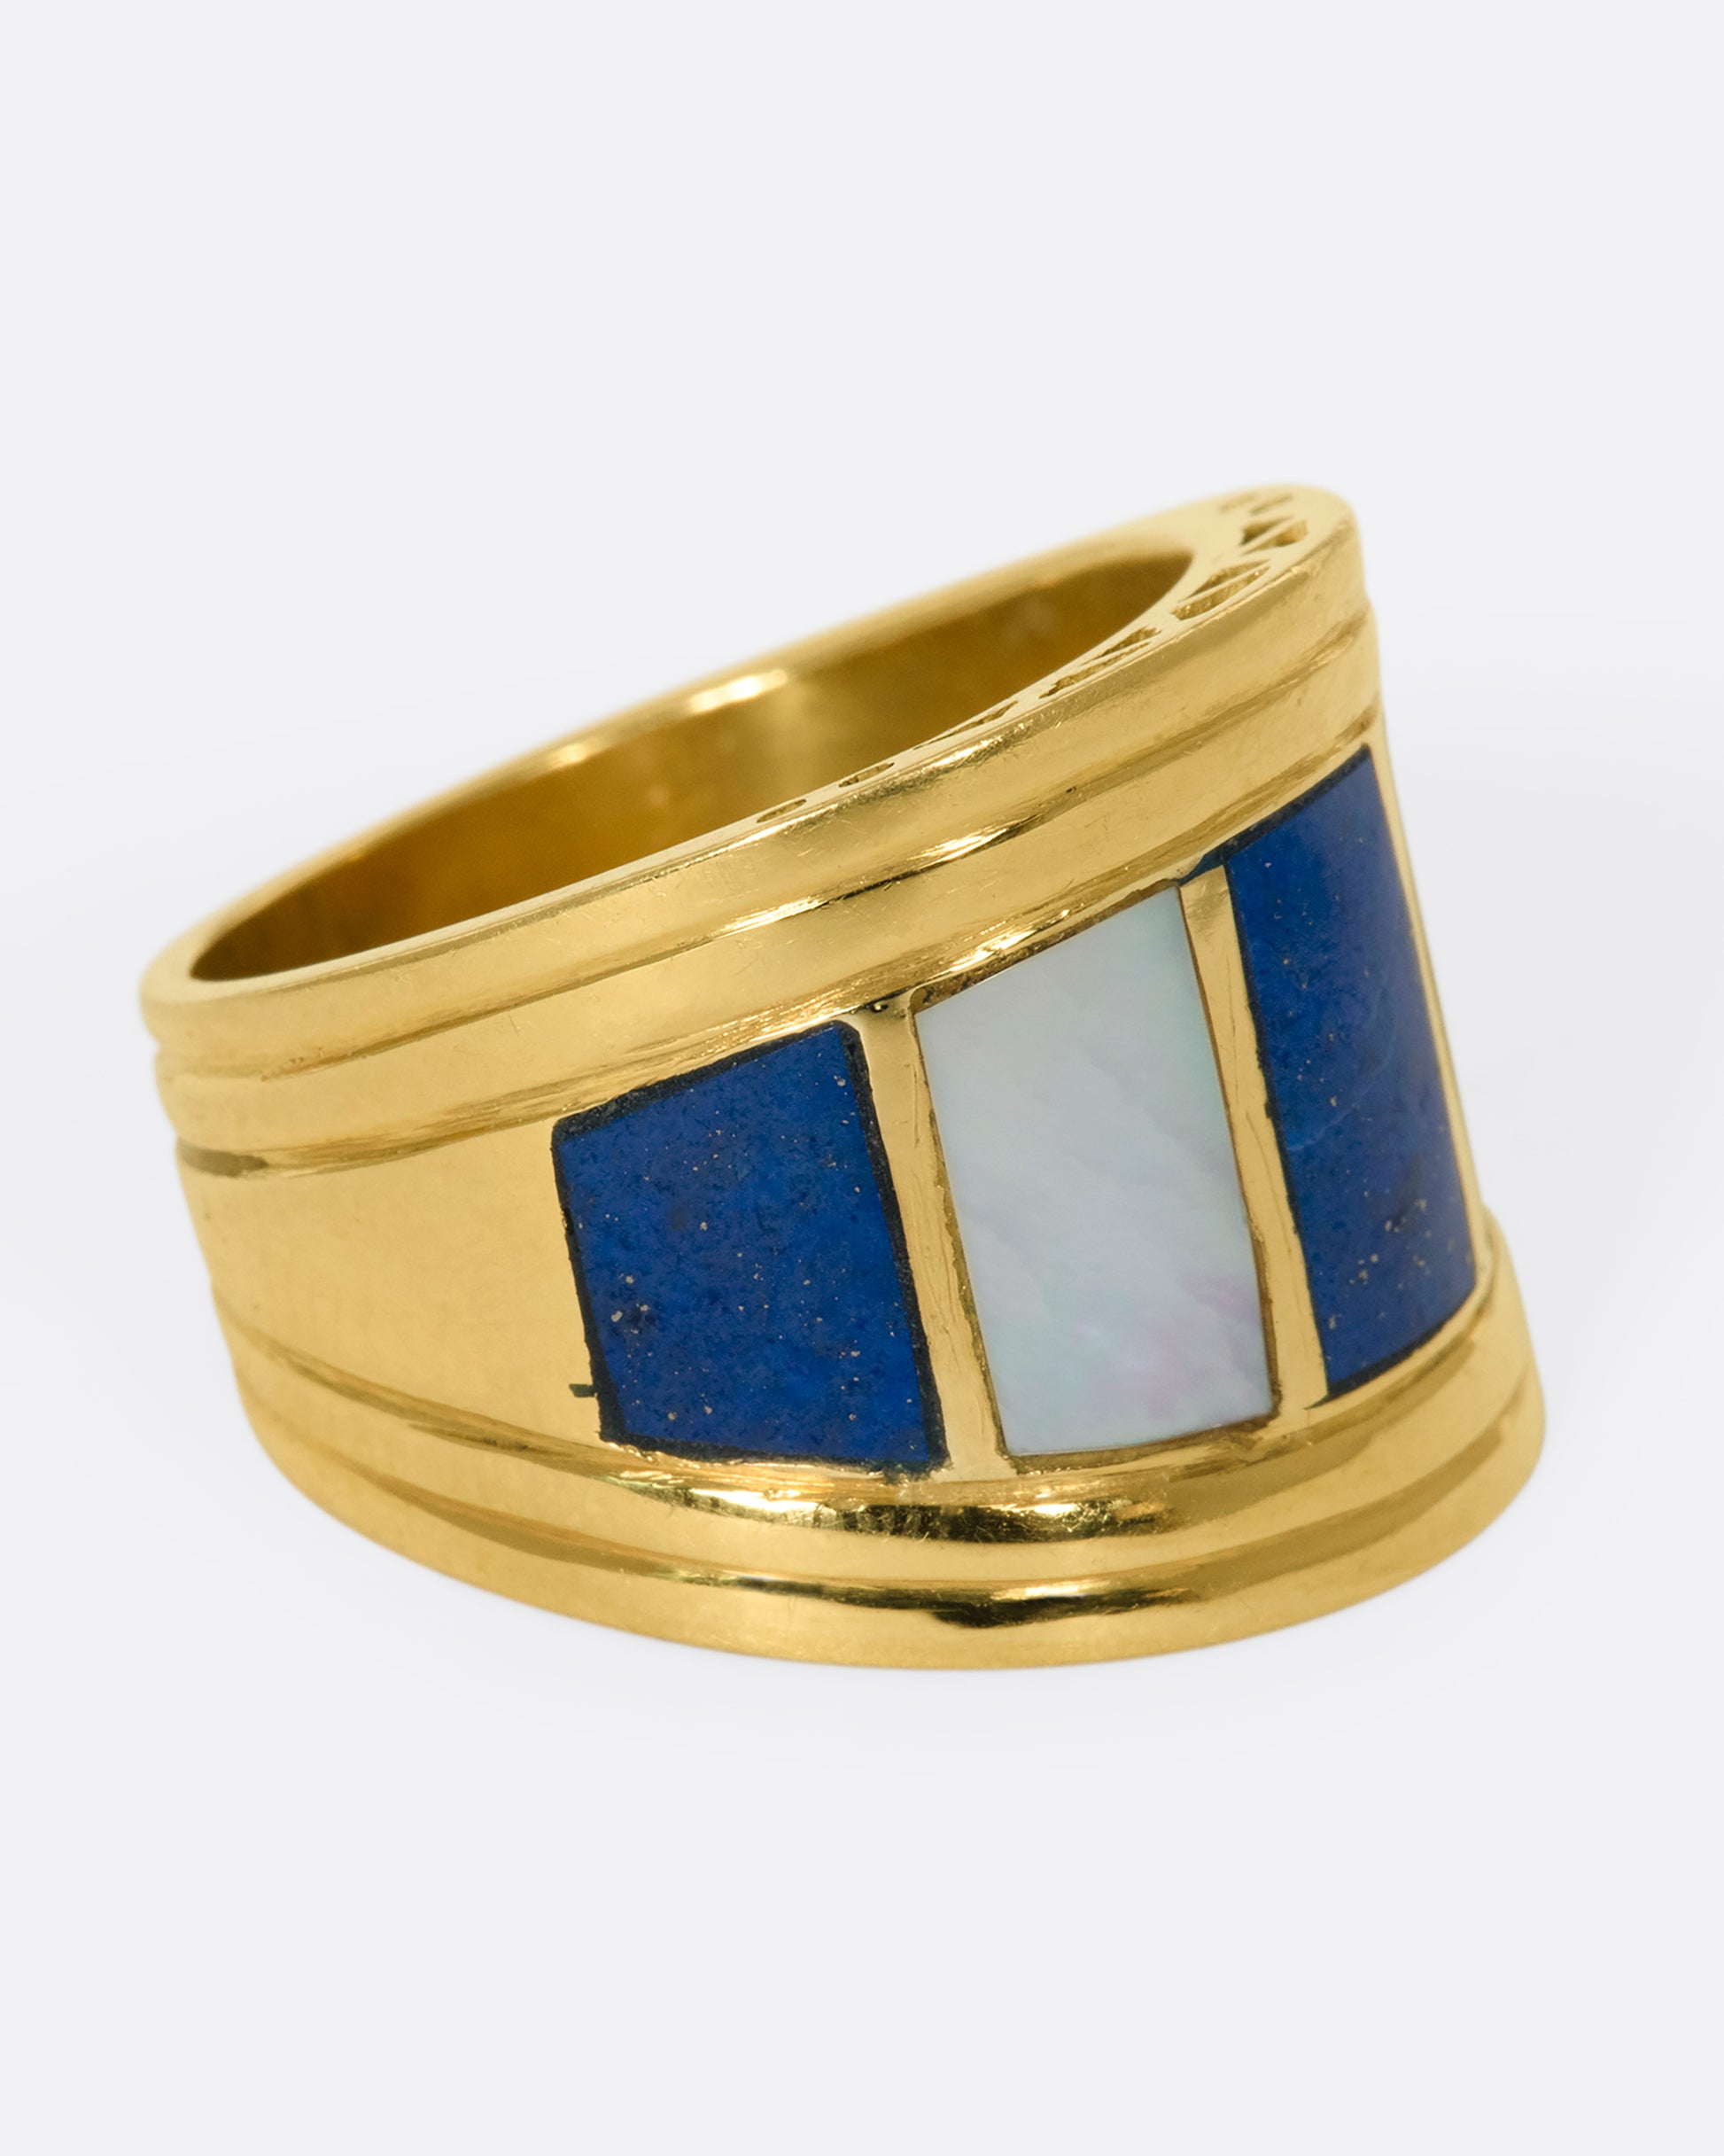 A right side view of a wide, tapered yellow gold ring with mother of pearl and lapis inlaid stripes.